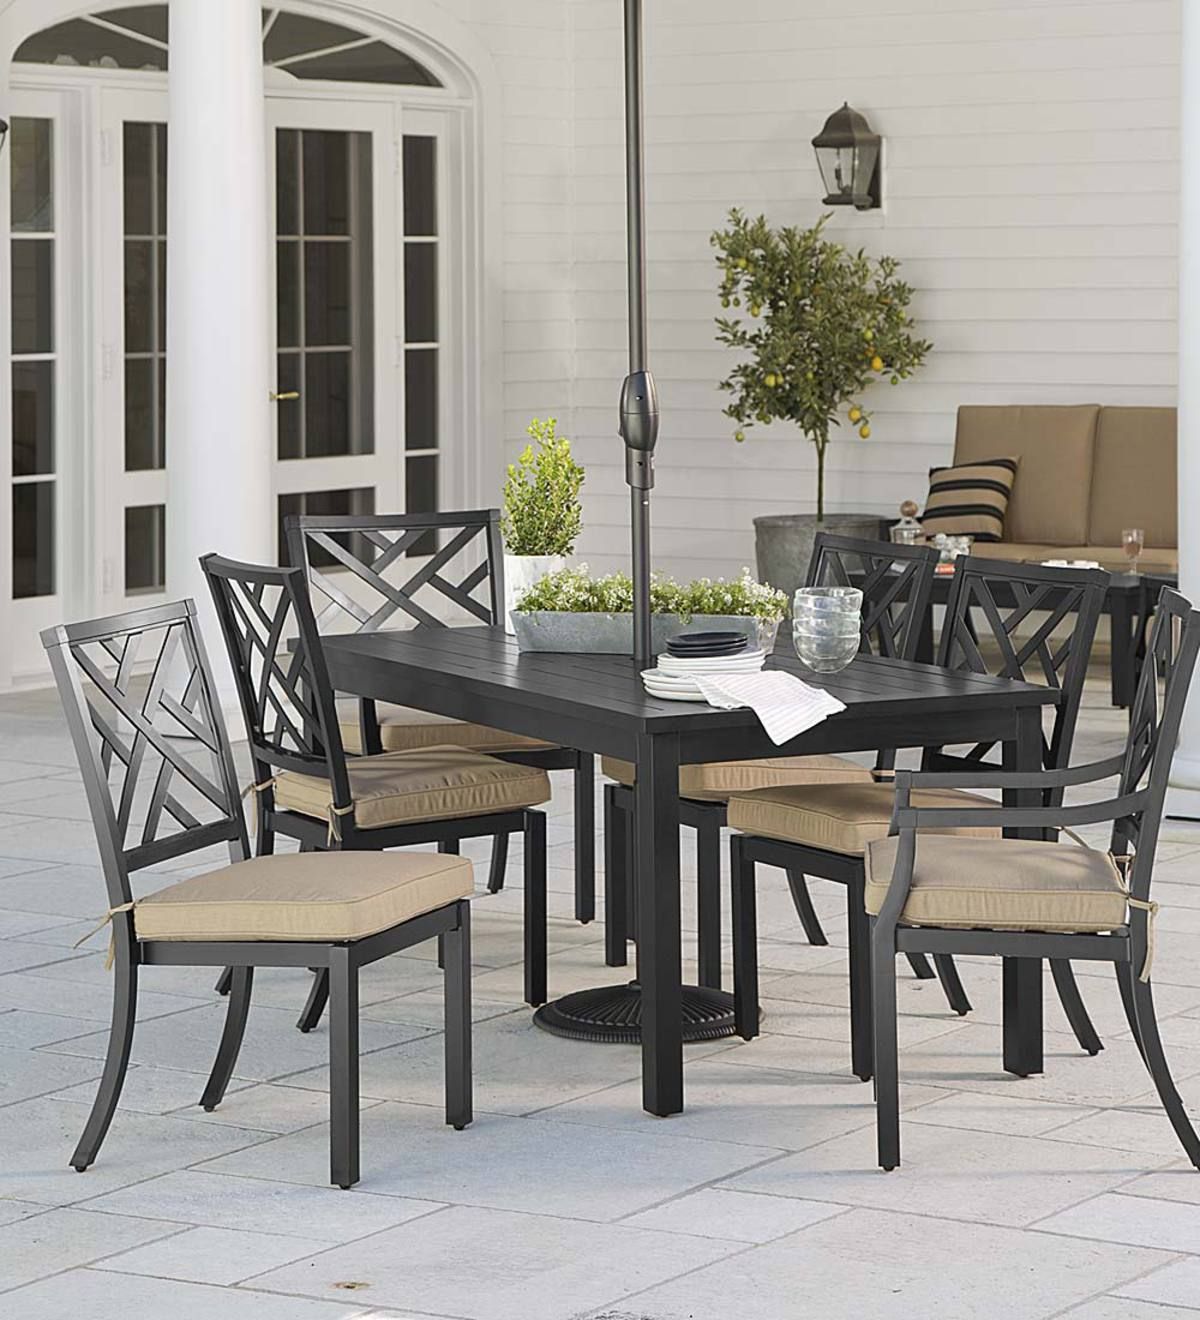 Chippendale Outdoor Dining Set With Cushions – Black With Heather Beige Regarding Off White Cushion Patio Dining Sets (View 14 of 15)